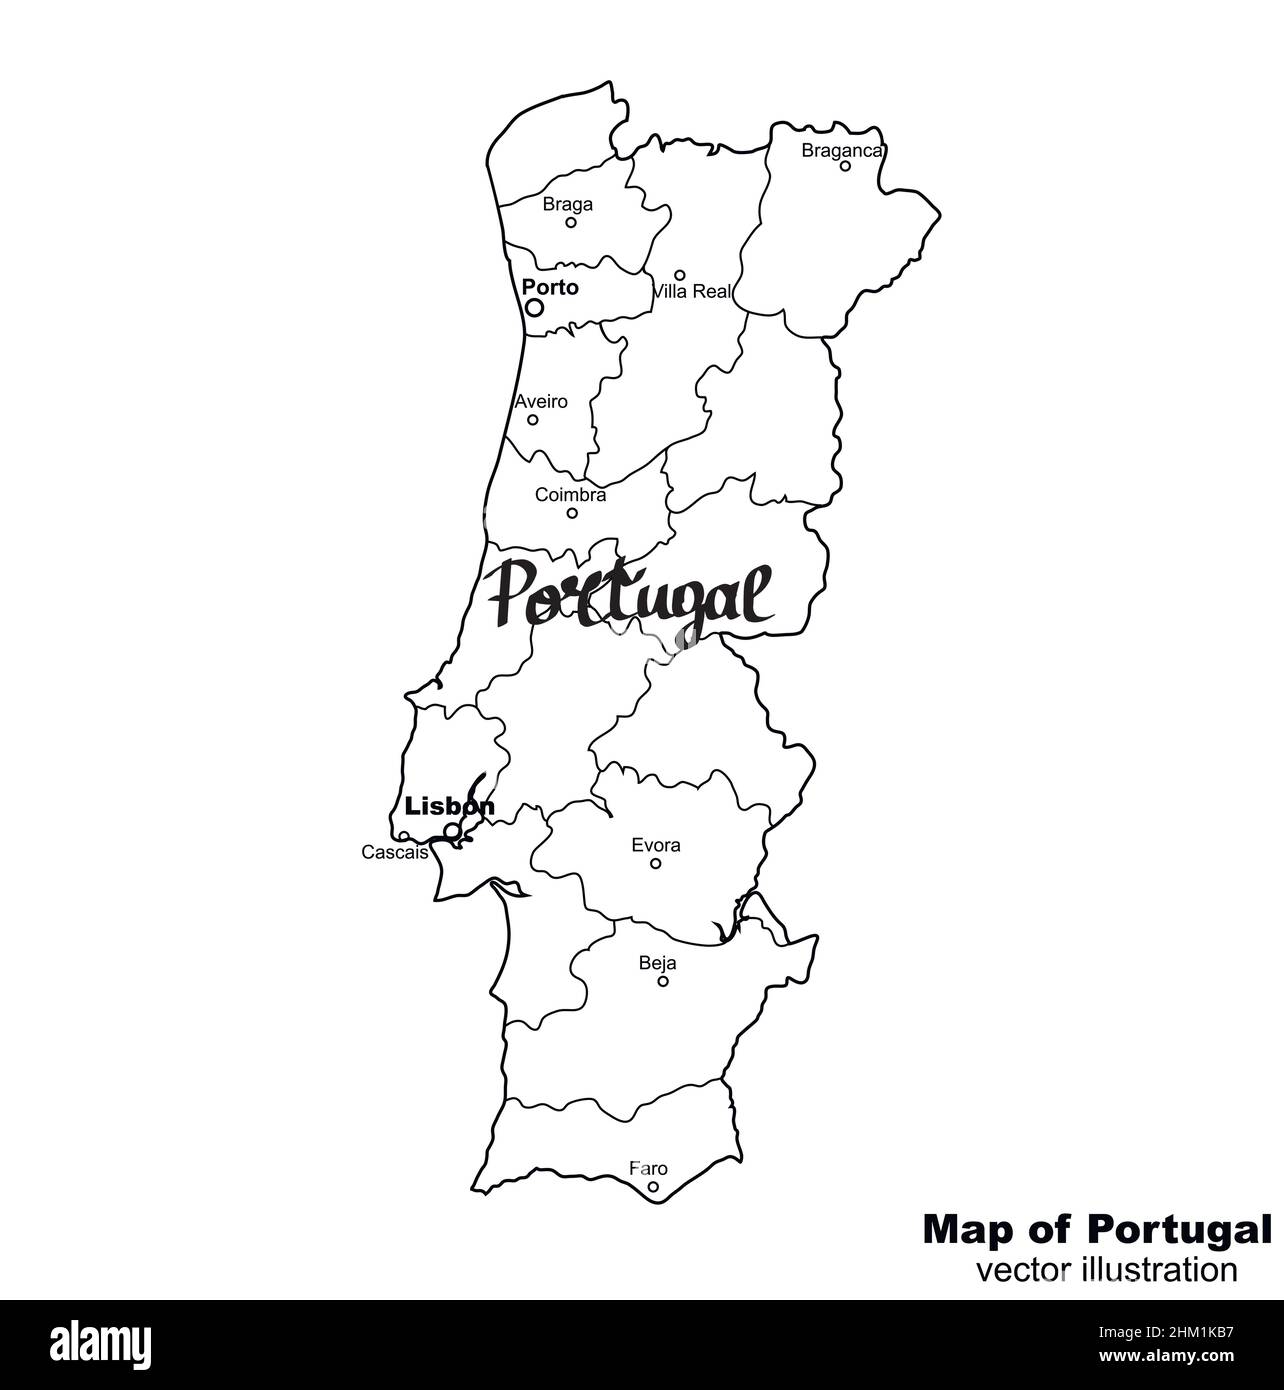 Map of Portugal. Bright illustration with map. Illustration with gray background. Portugal map with portuguese major cities. Illustration. Stock Vector